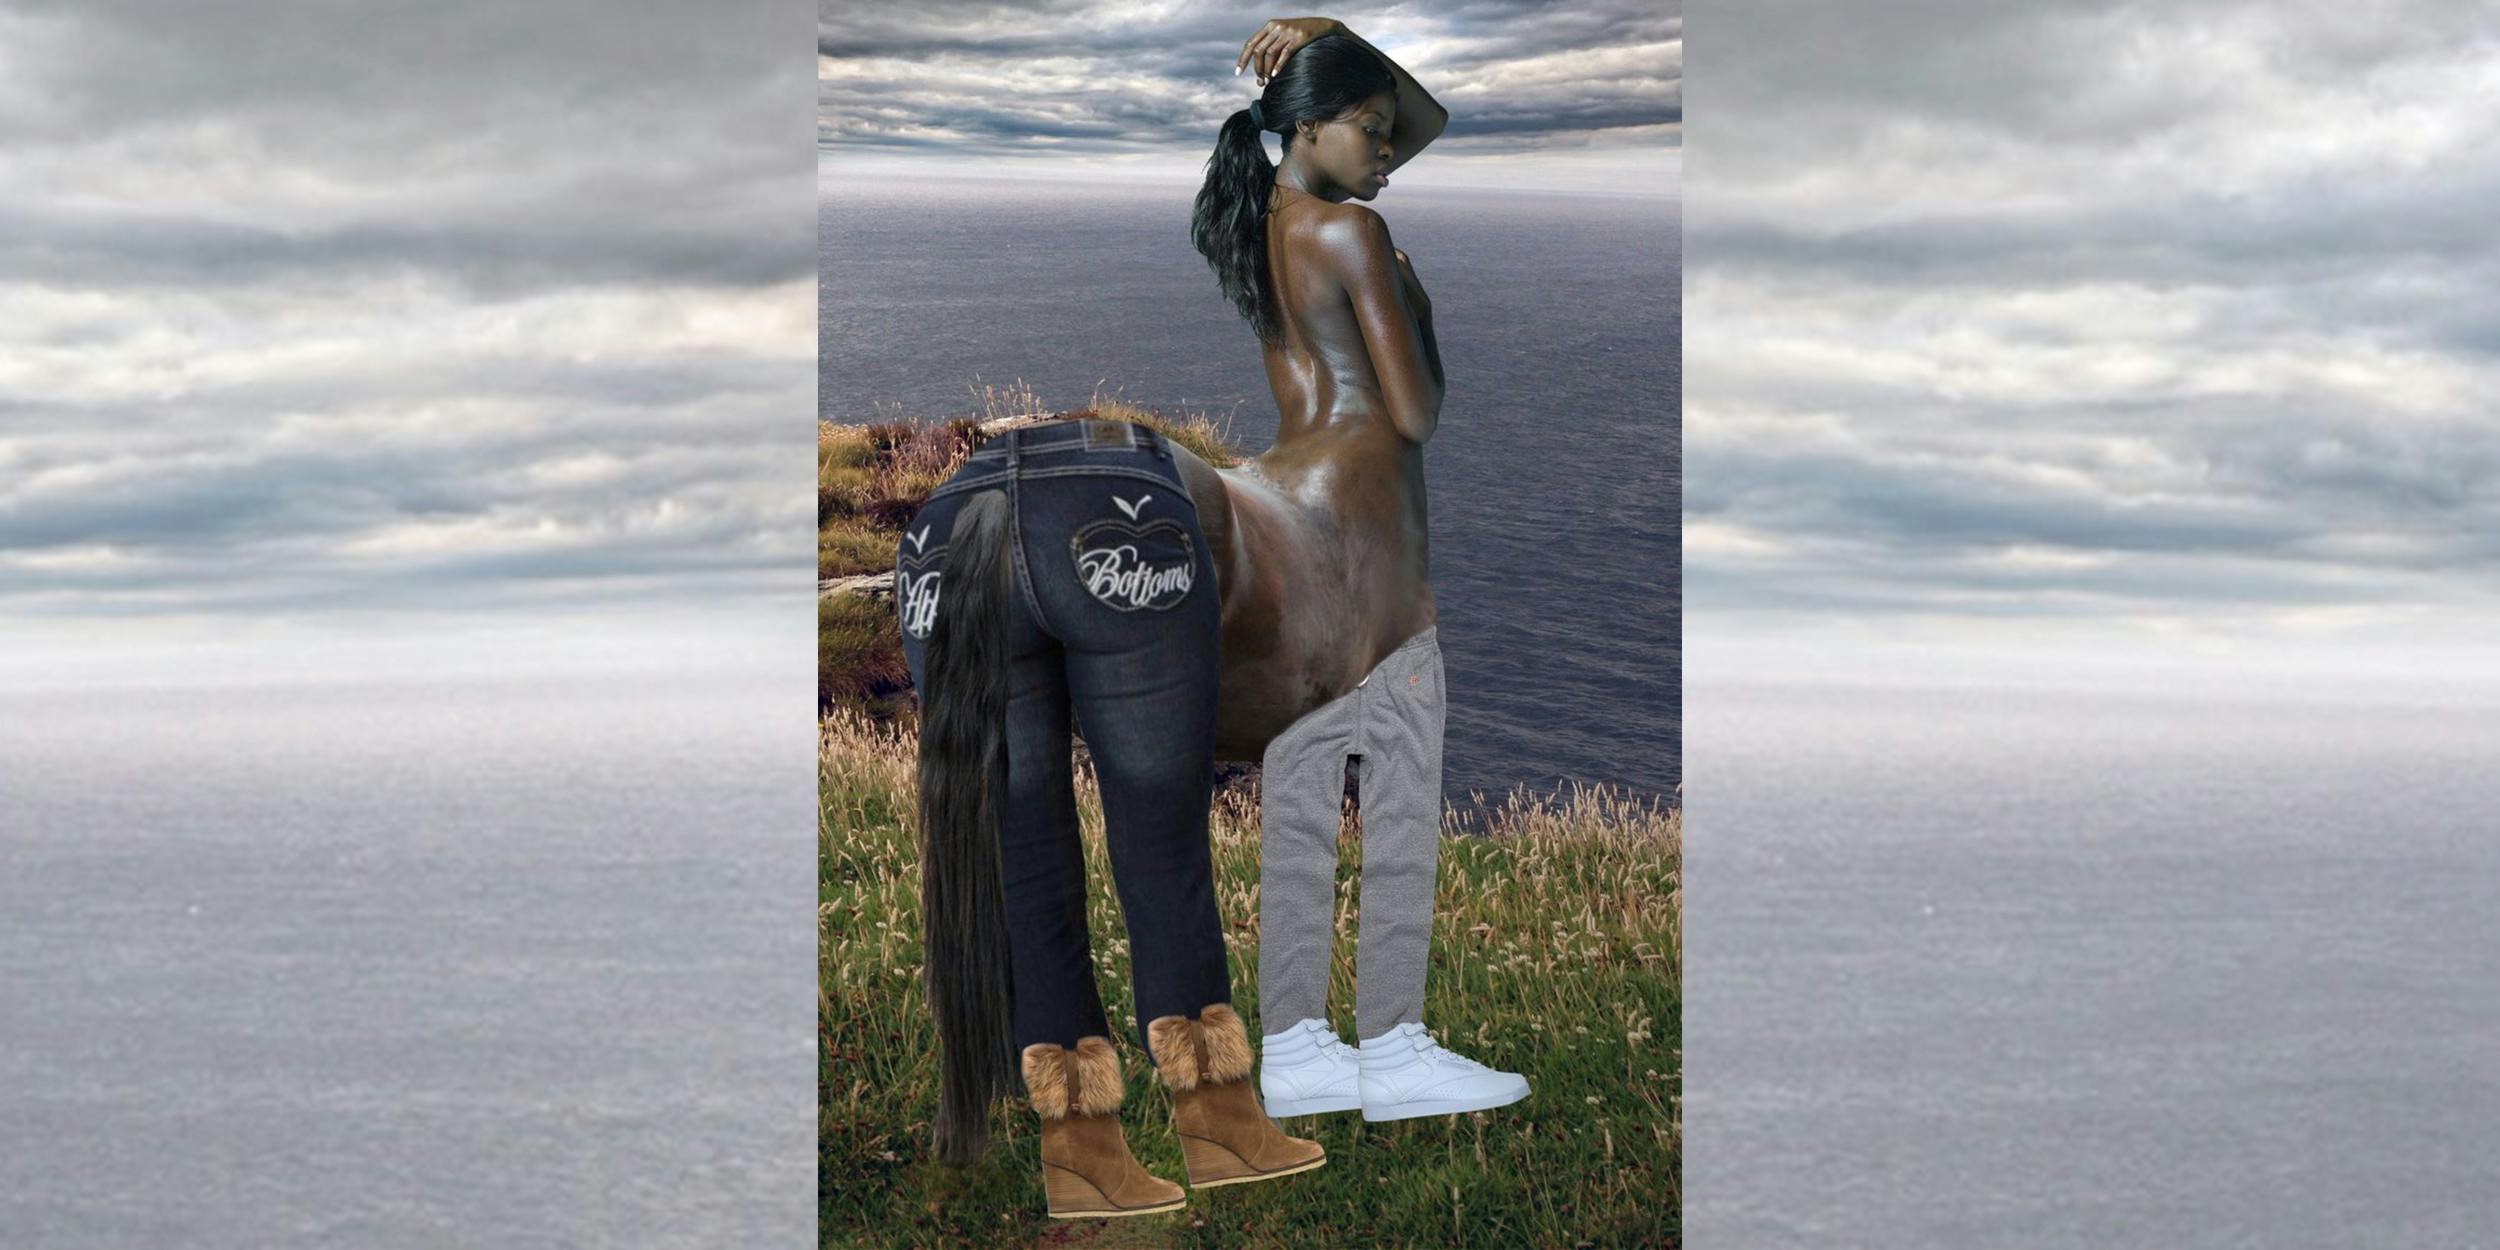 Centaur woman with Apple Bottom jeans, boots with the fur, baggy sweatpants and the Reeboks with the straps